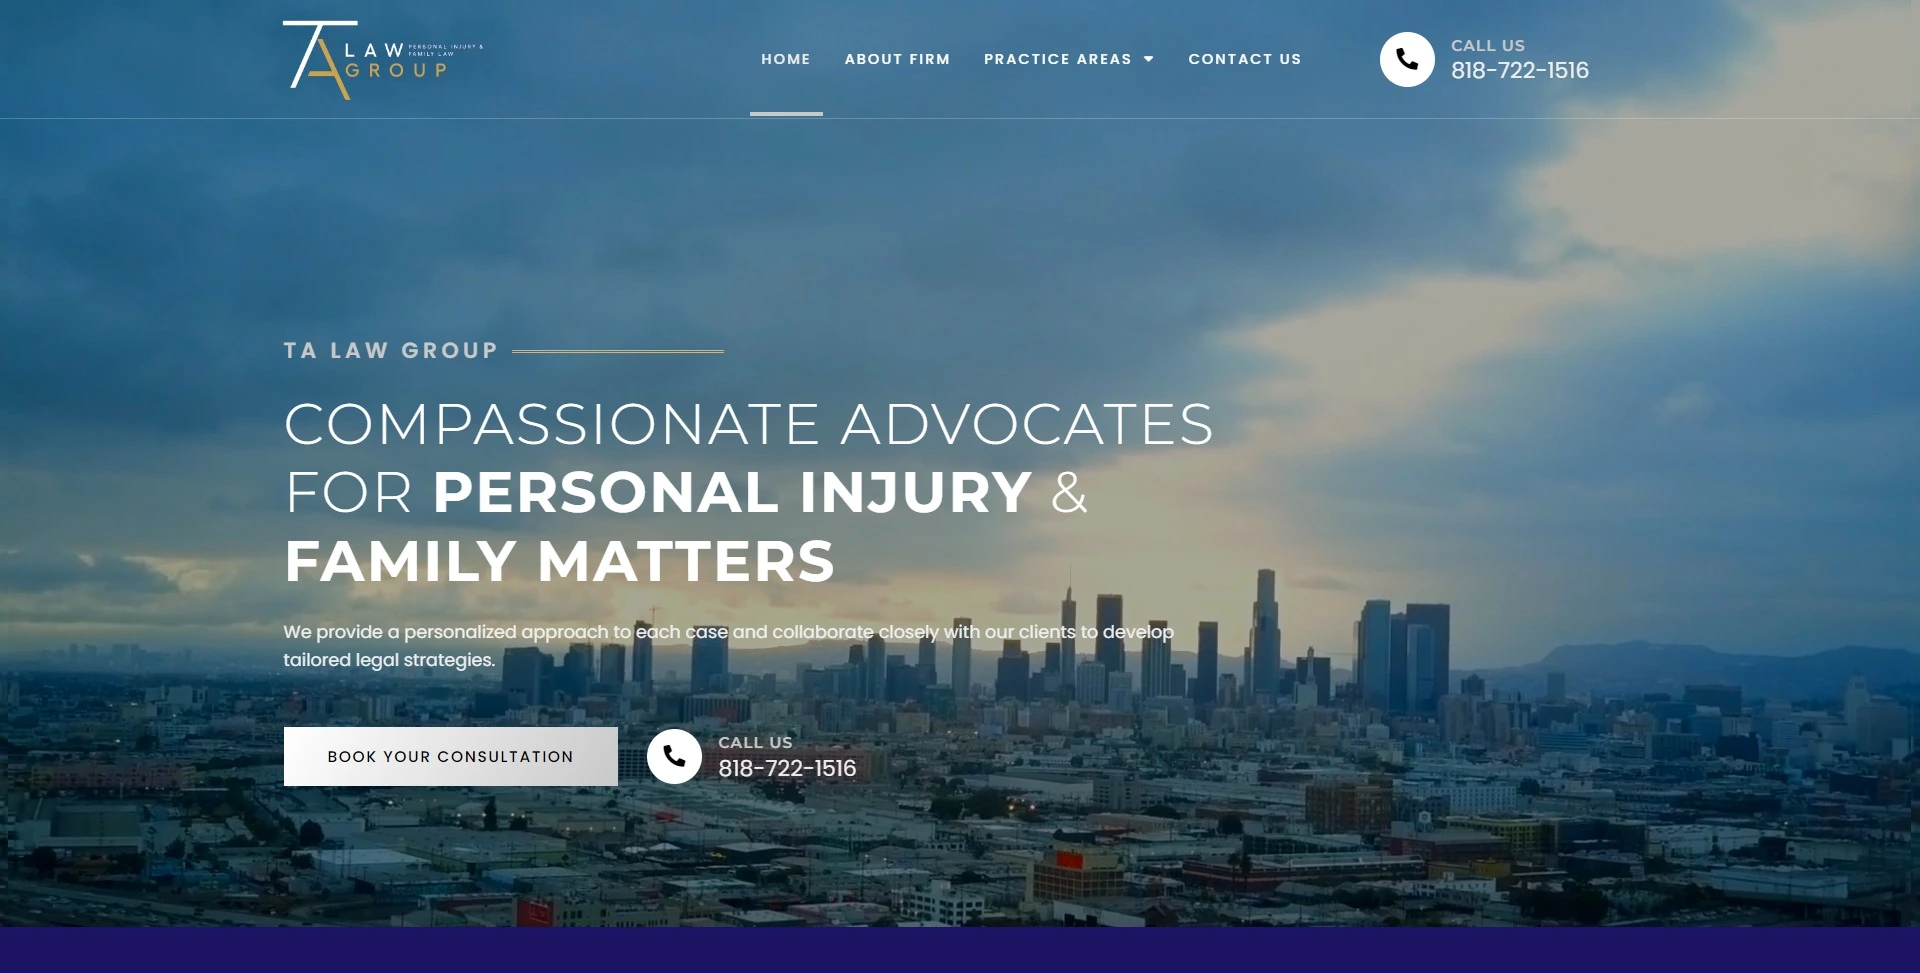 TA Legal Services California law firm website design for lawyer